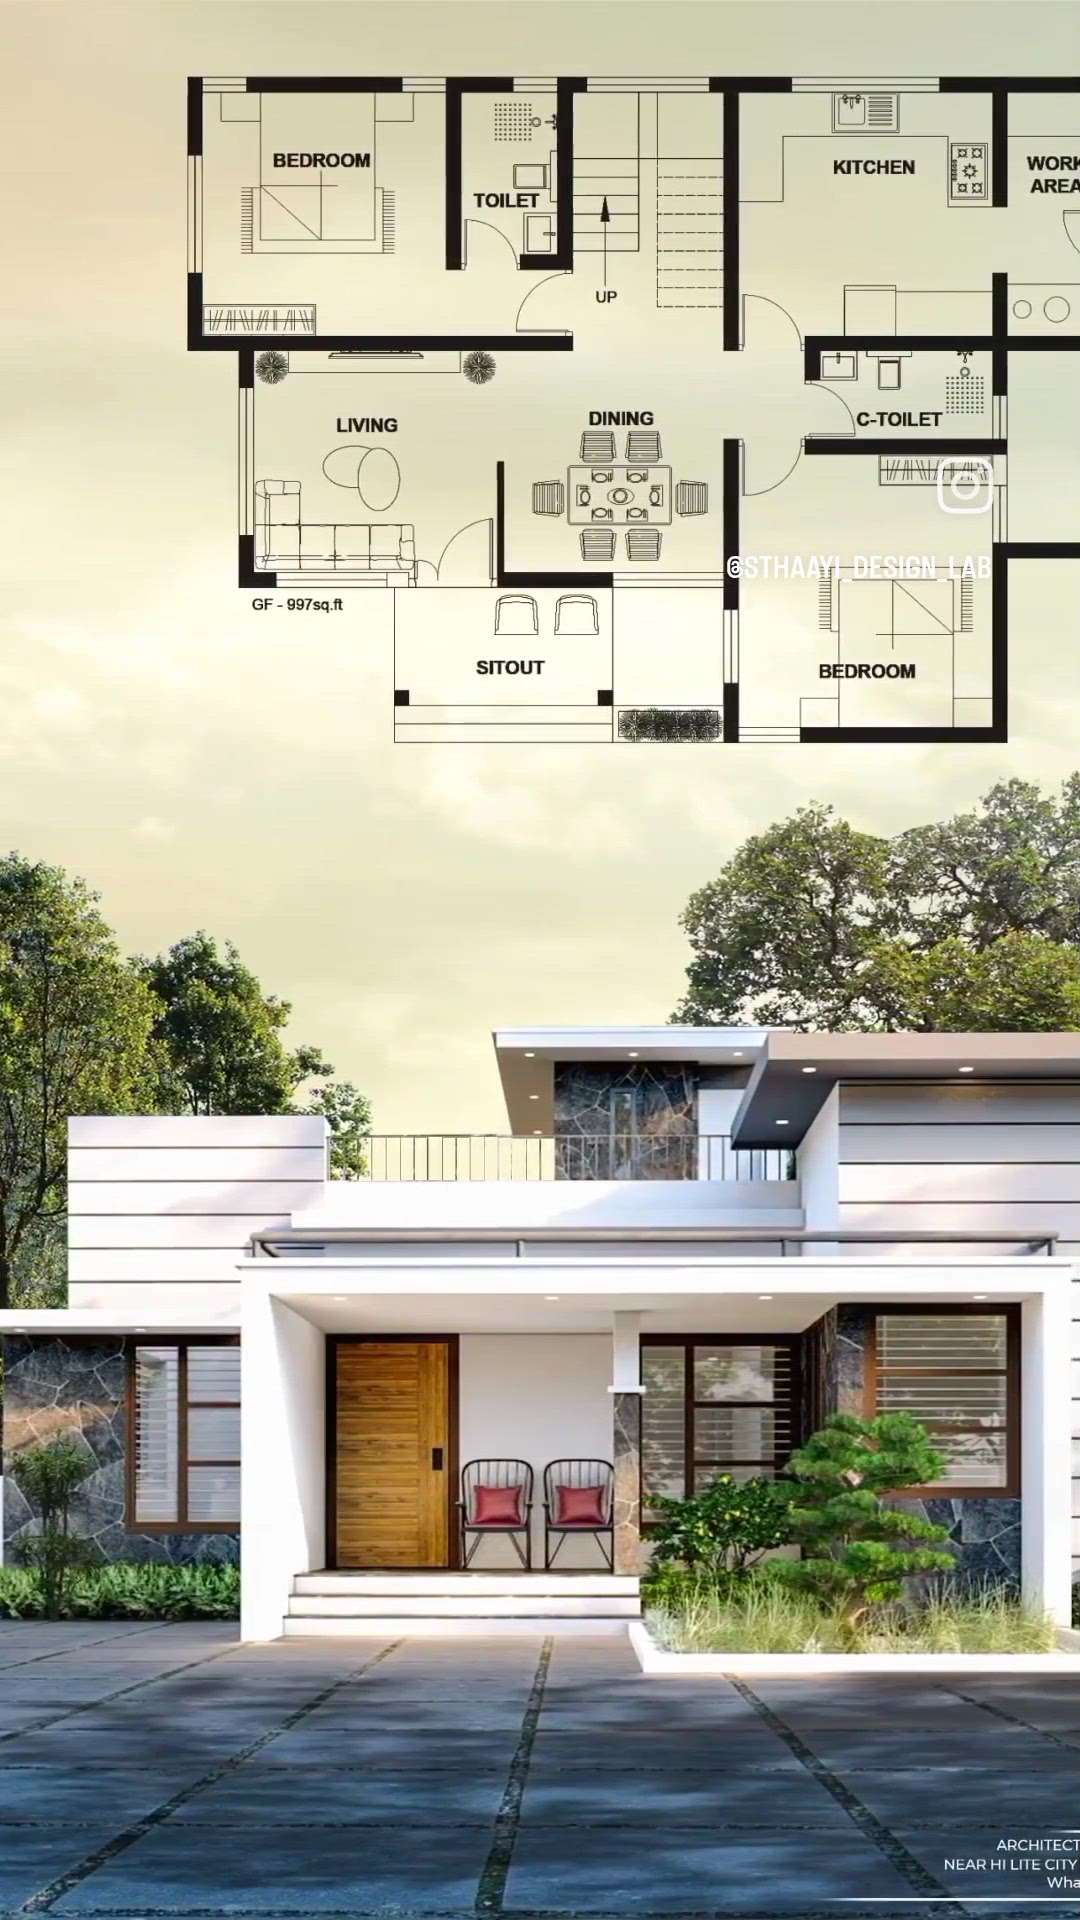 Beautiful 997 sqft Budget Home Exterior with plan 🏠🏡2BHK 🏕🏠 Design: @sthaayi_design_lab
.
Sitout
Living
2Bedroom 1attached 1C-toilet
Dining 
Kitchen 
Work Area 

.
.
.
.
.

#khd #keralahomedesigns
#keralahomedesign #architecturekerala #keralaarchitecture #renovation #keralahomes #interior #interiorkerala #homedecor #landscapekerala #archdaily #homedesigns #elevation #homedesign #kerala #keralahome #thiruvanathpuram #kochi #interior #homedesign #arch #designkerala #archlife #godsowncountry #interiordesign #architect #builder #budgethome #homedecor #elevation #plan